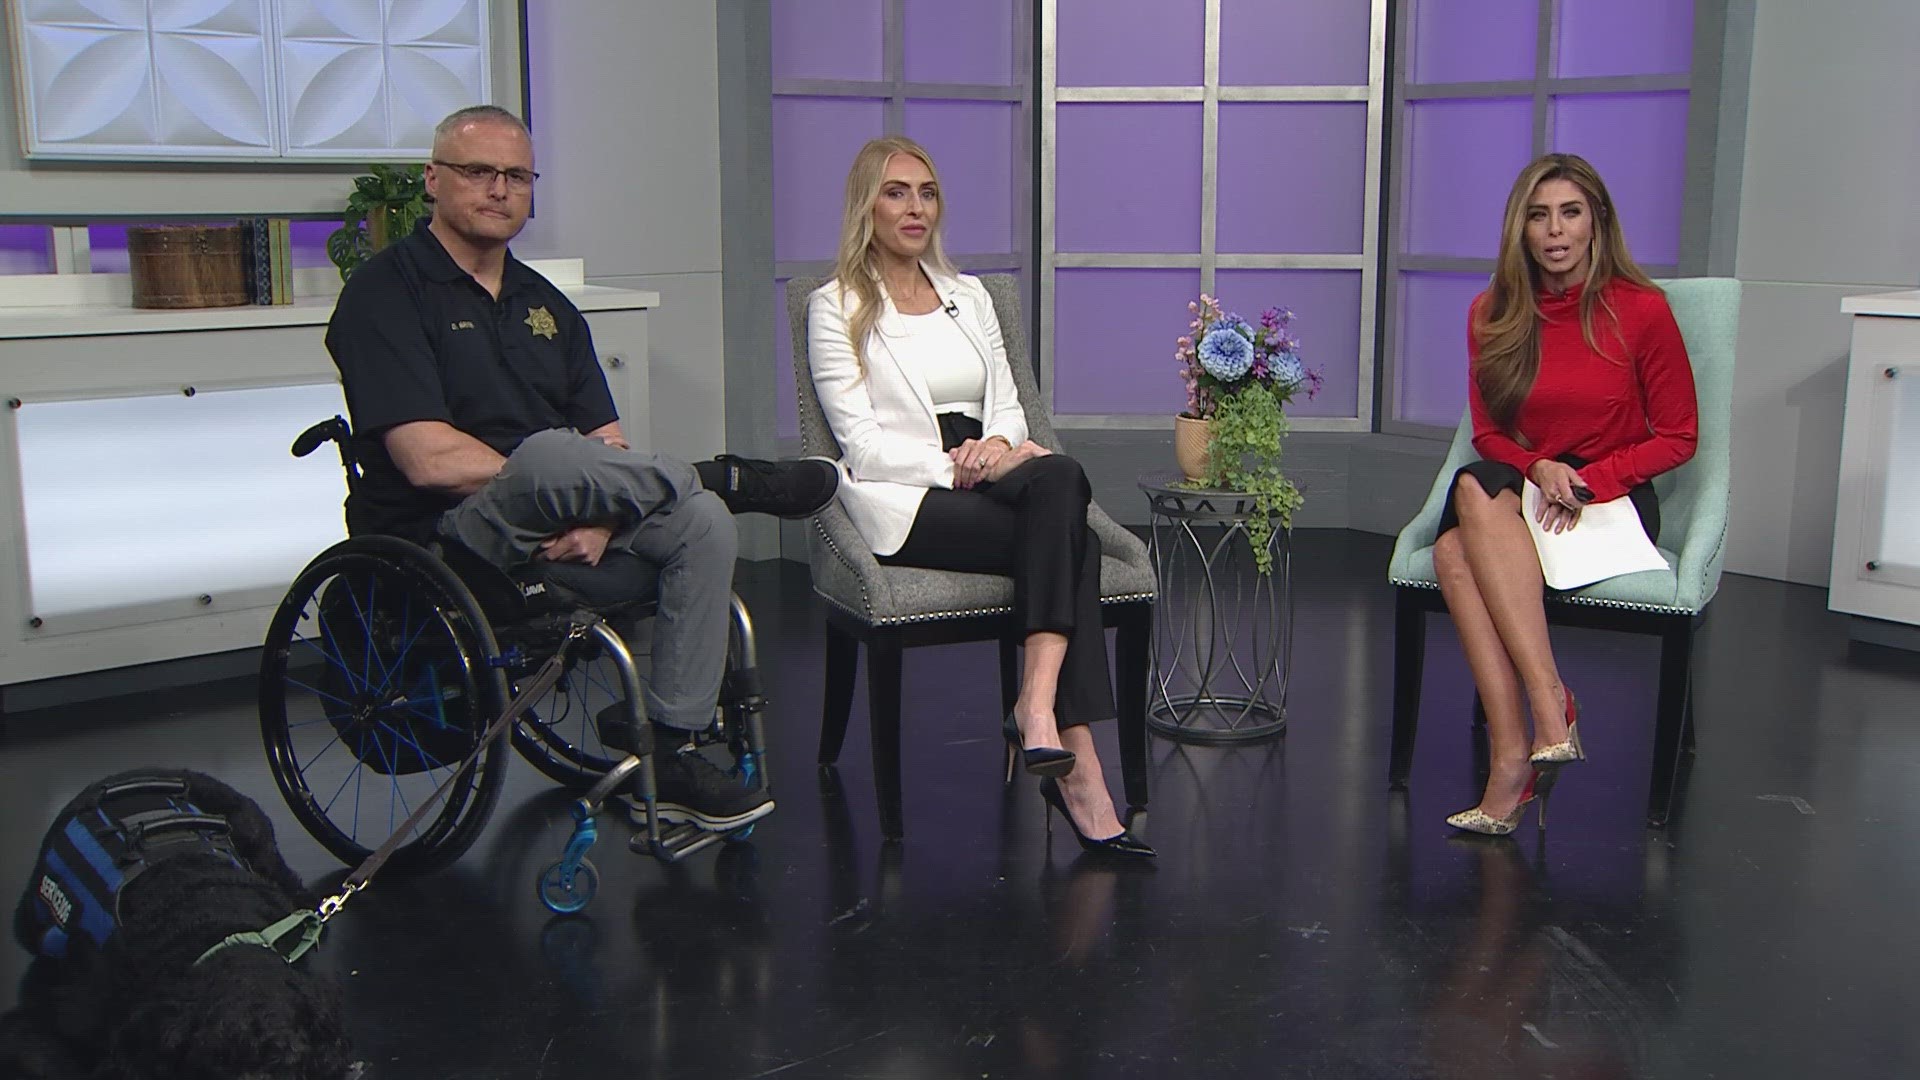 Douglas County Wellness Coordinator Danny Bright and Rachel Lambert, owner and founder of Braincode, talk about how it helps with trauma through neural feedback.